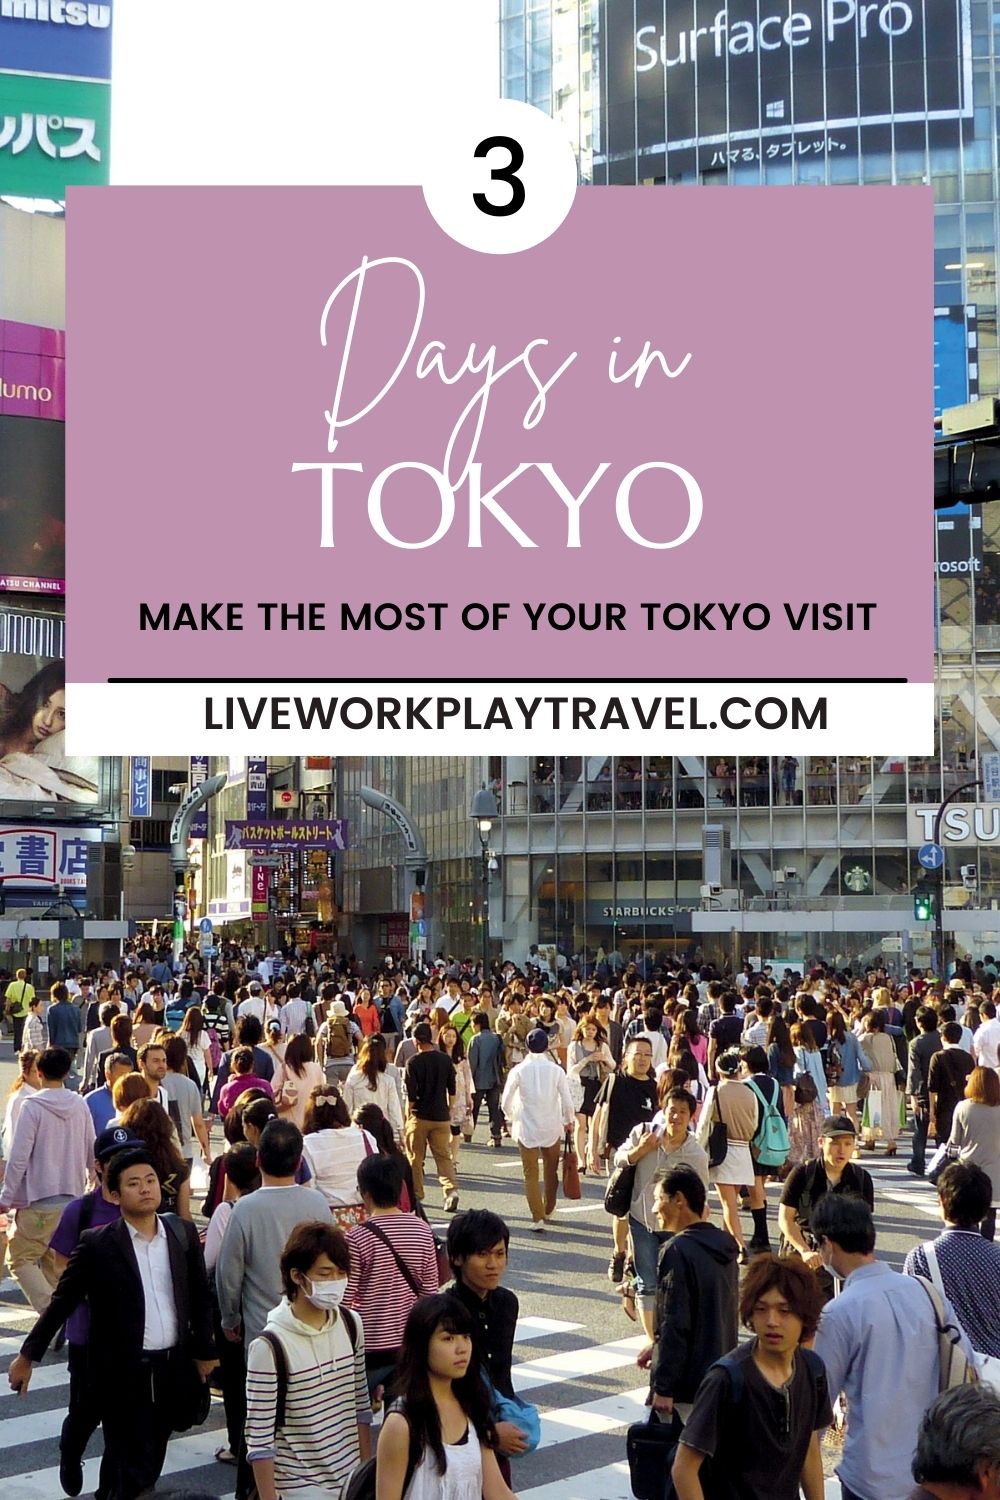 Shibuya Crossing Is A Must See On This 3 Day Tokyo Itinerary.